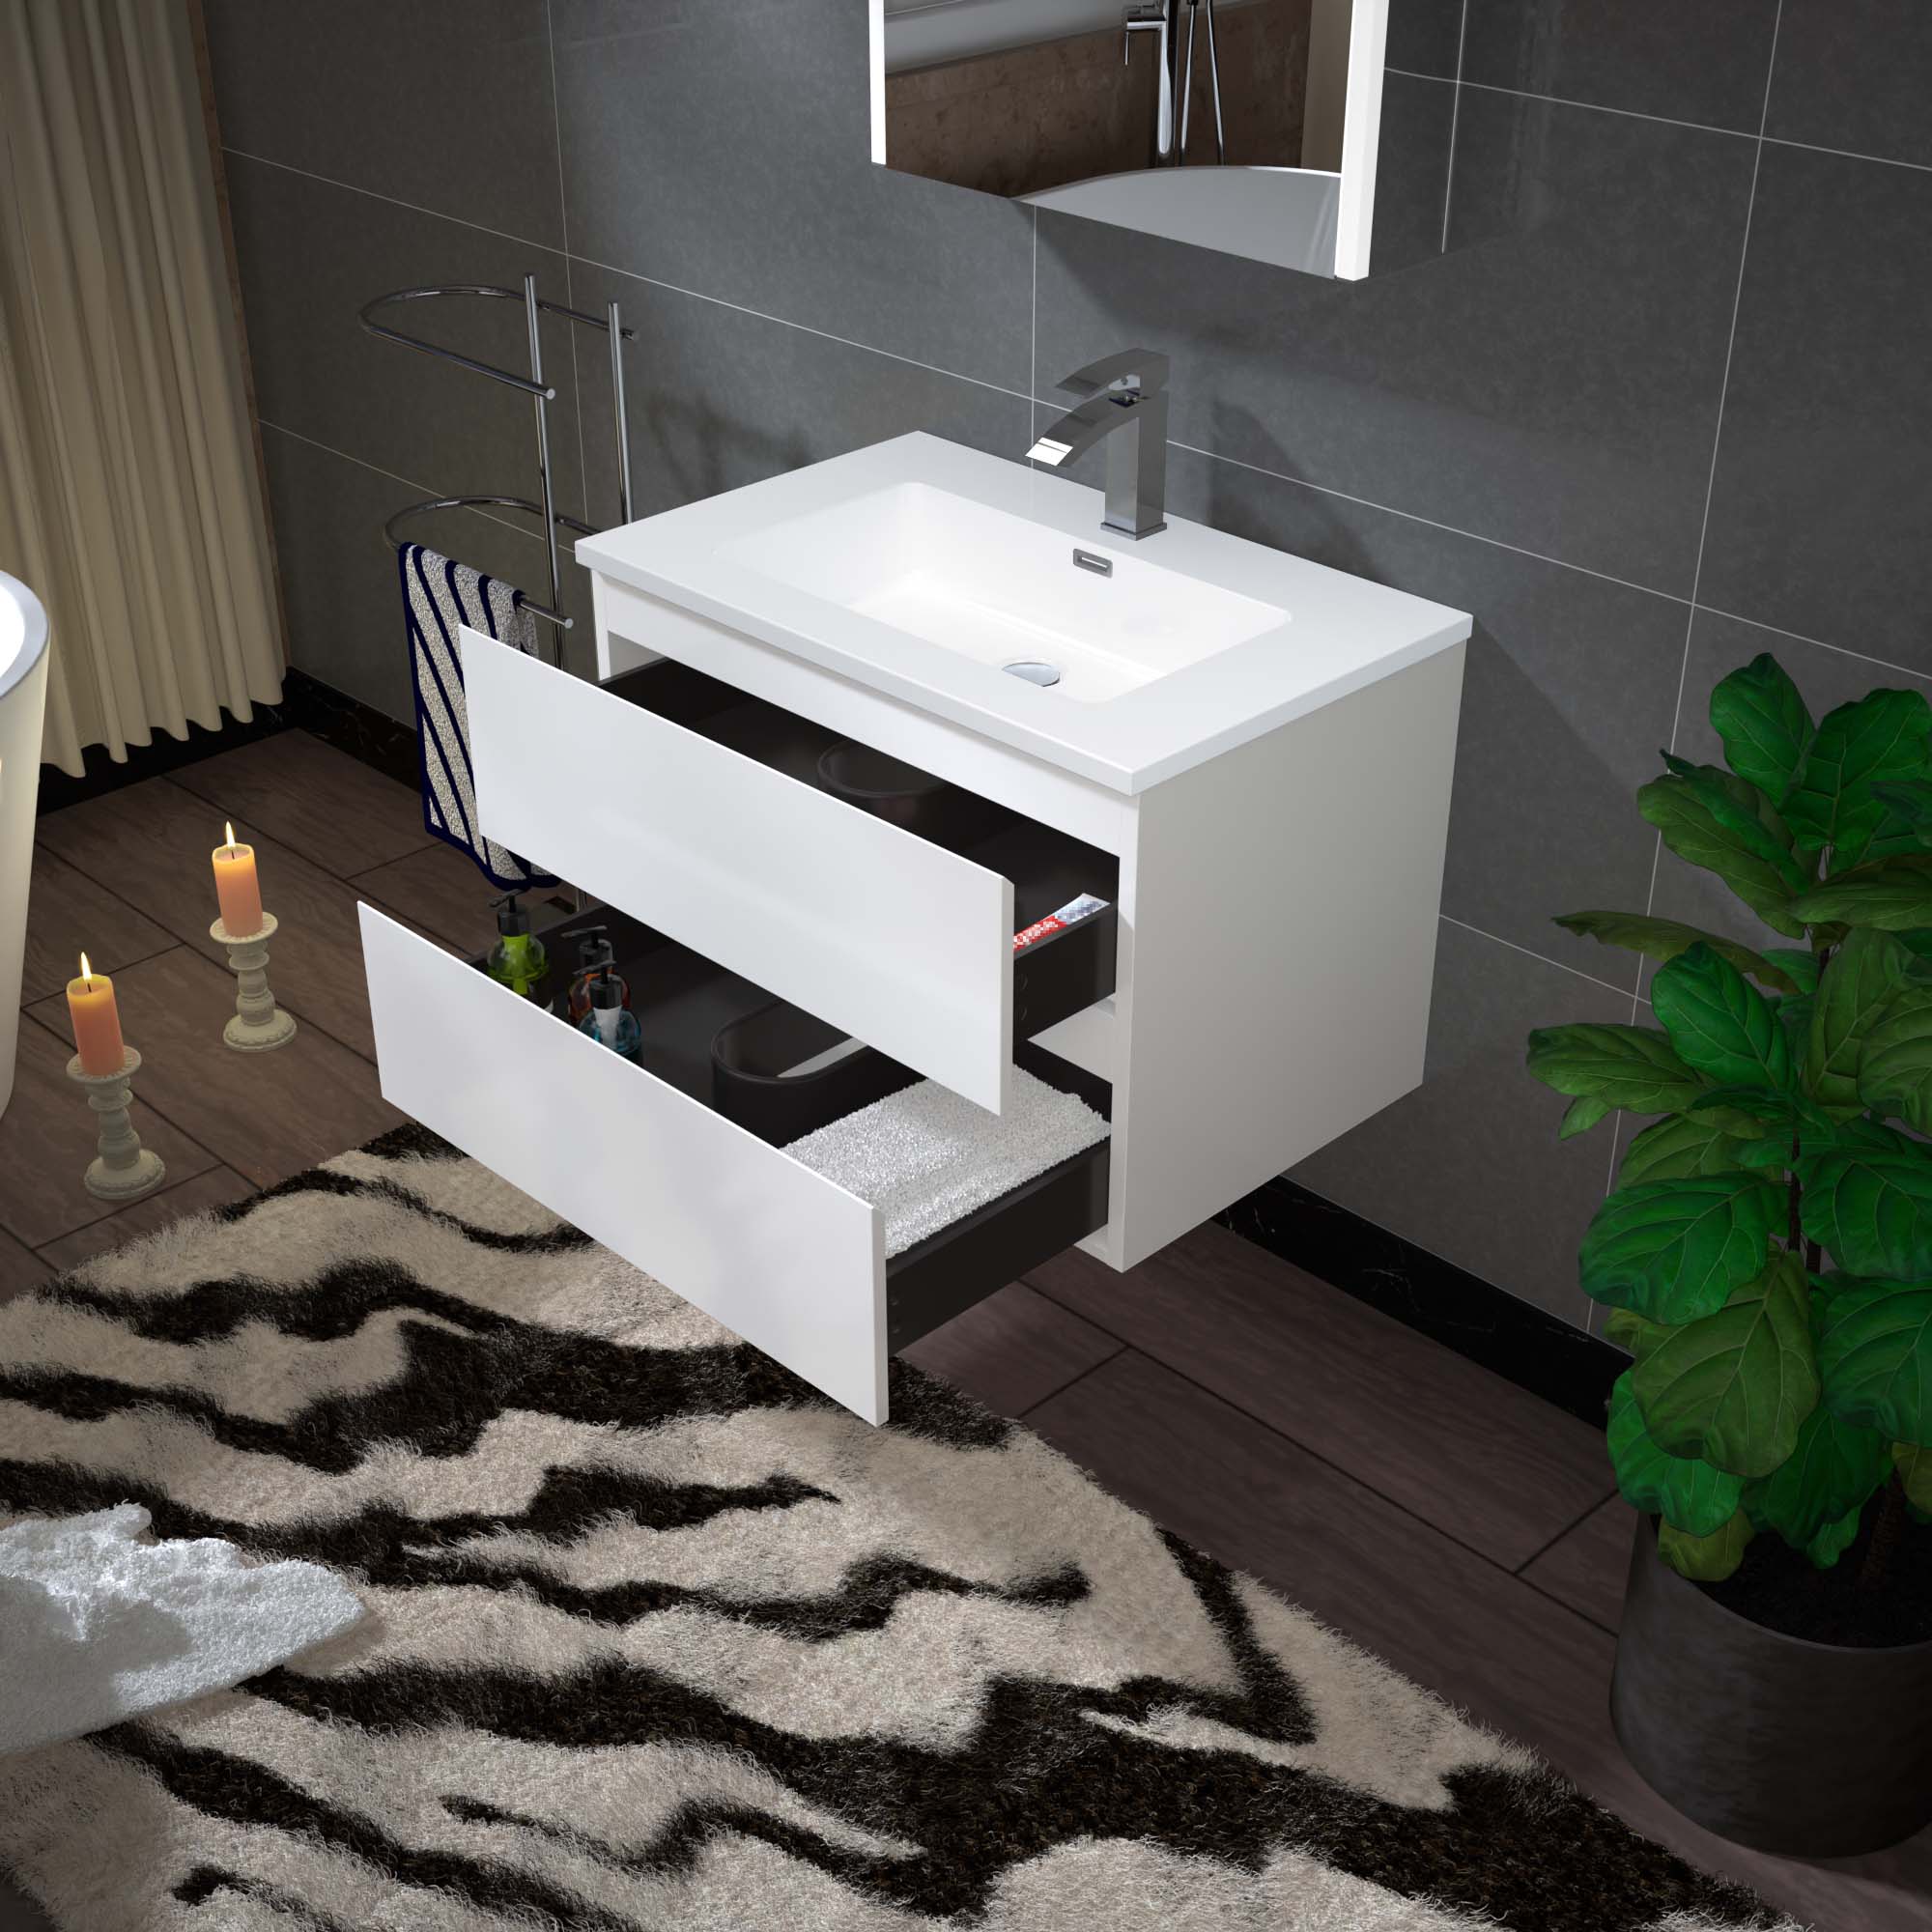  WOODBRIDGE 30 in. W x 18-7/8 in. D Contemporary Wall Hung Floating Vanity in High Gloss White with Resin Composite Vanity Top in White with matching finish sink._12716